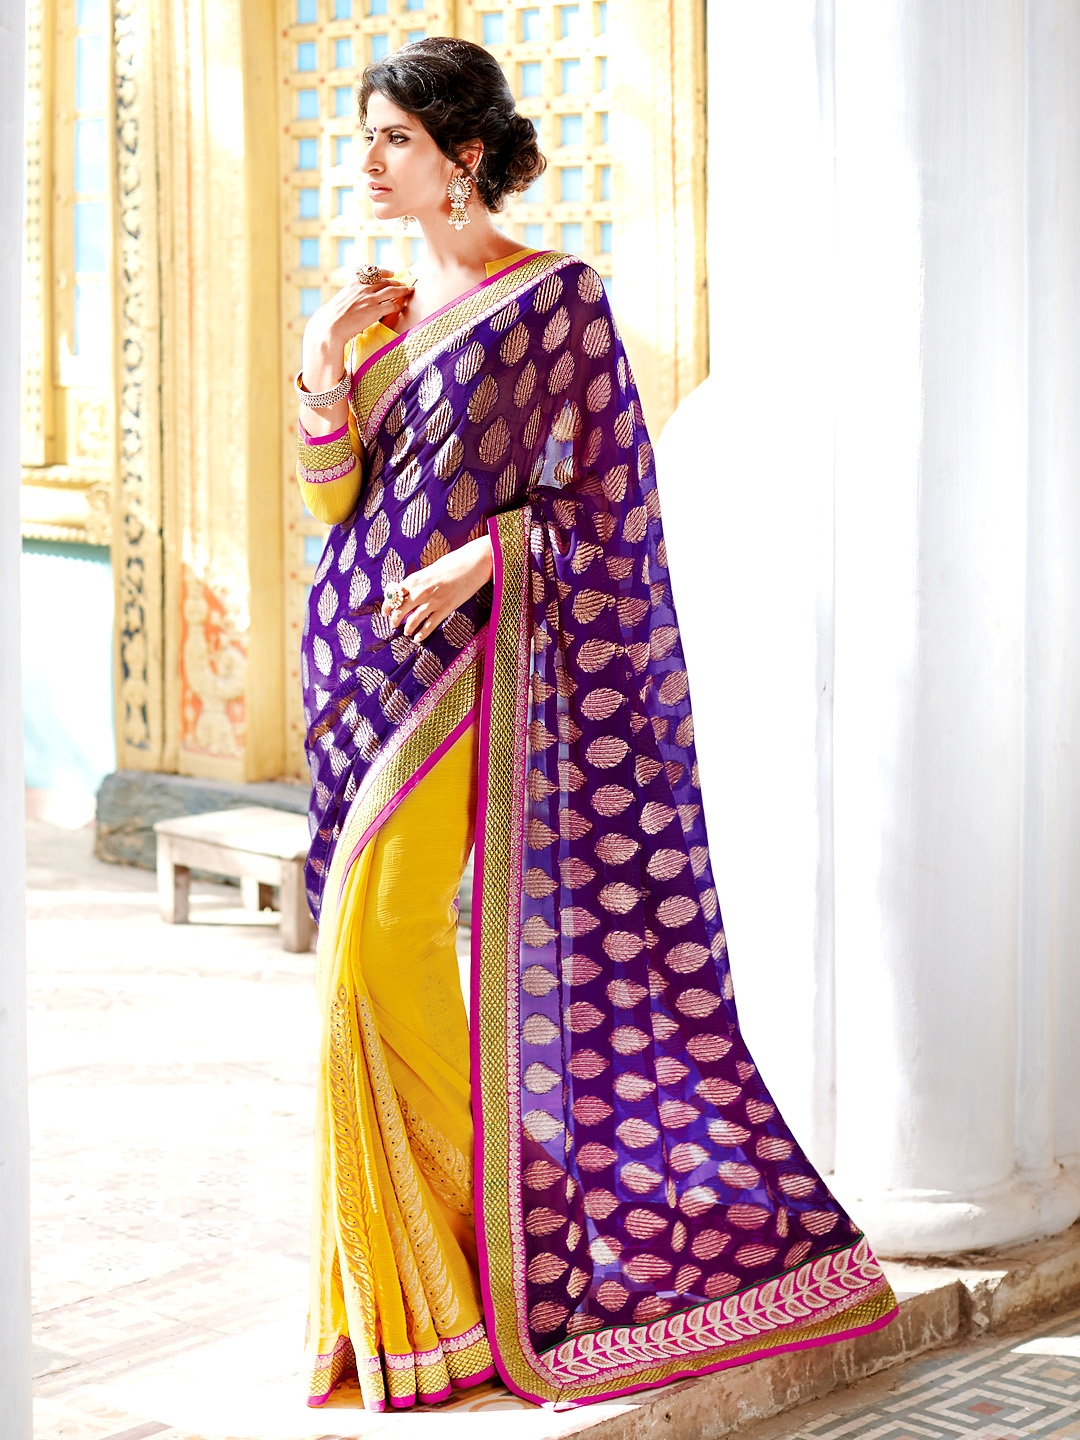 Laxmipati Sarees - Find our new designer semi embroidery catalog -  J*I*N*N*A*T ONLY ON: www.laxmipati.com | Facebook